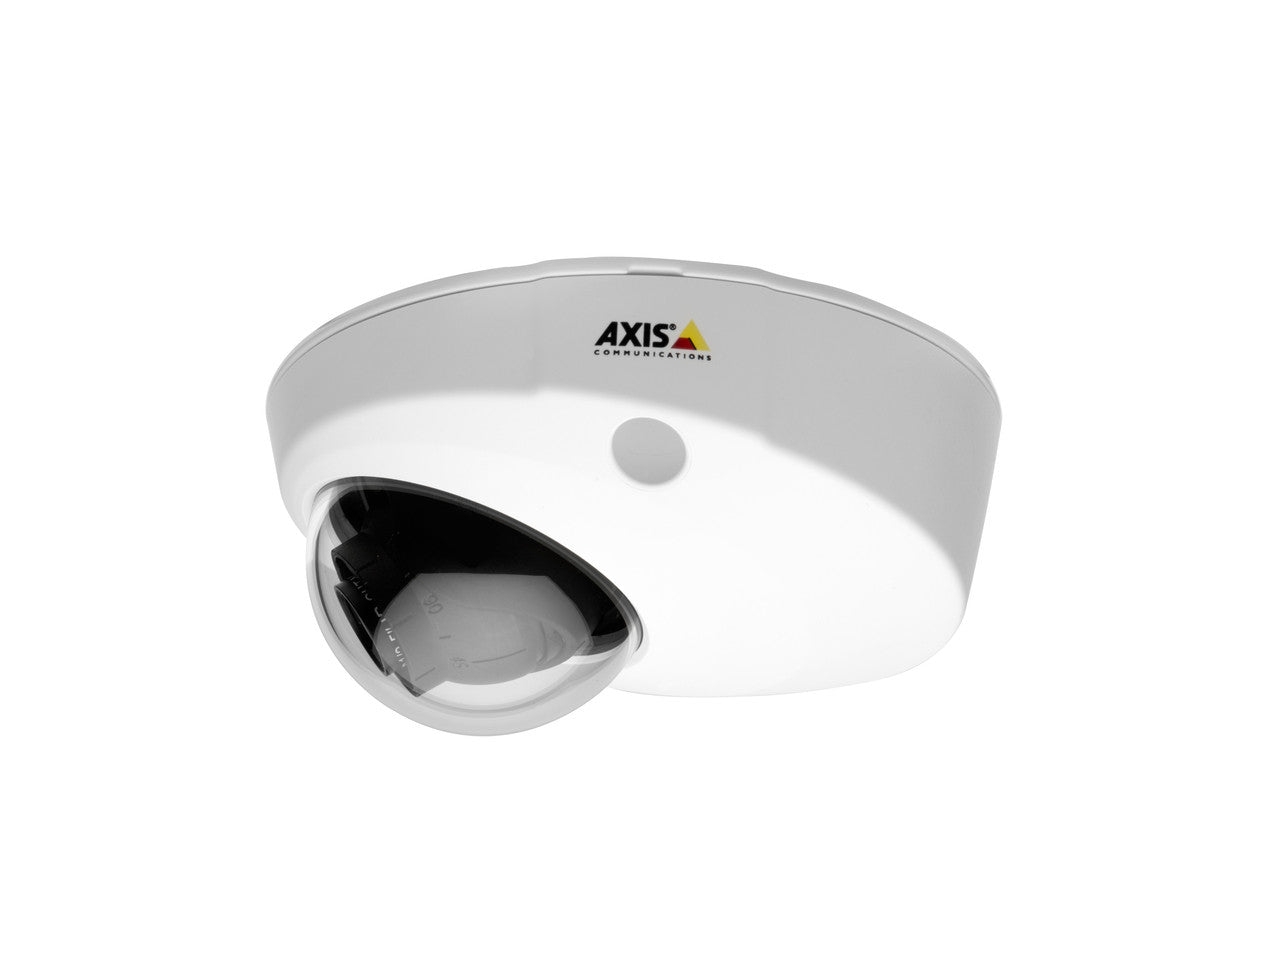 AXIS P3905-R